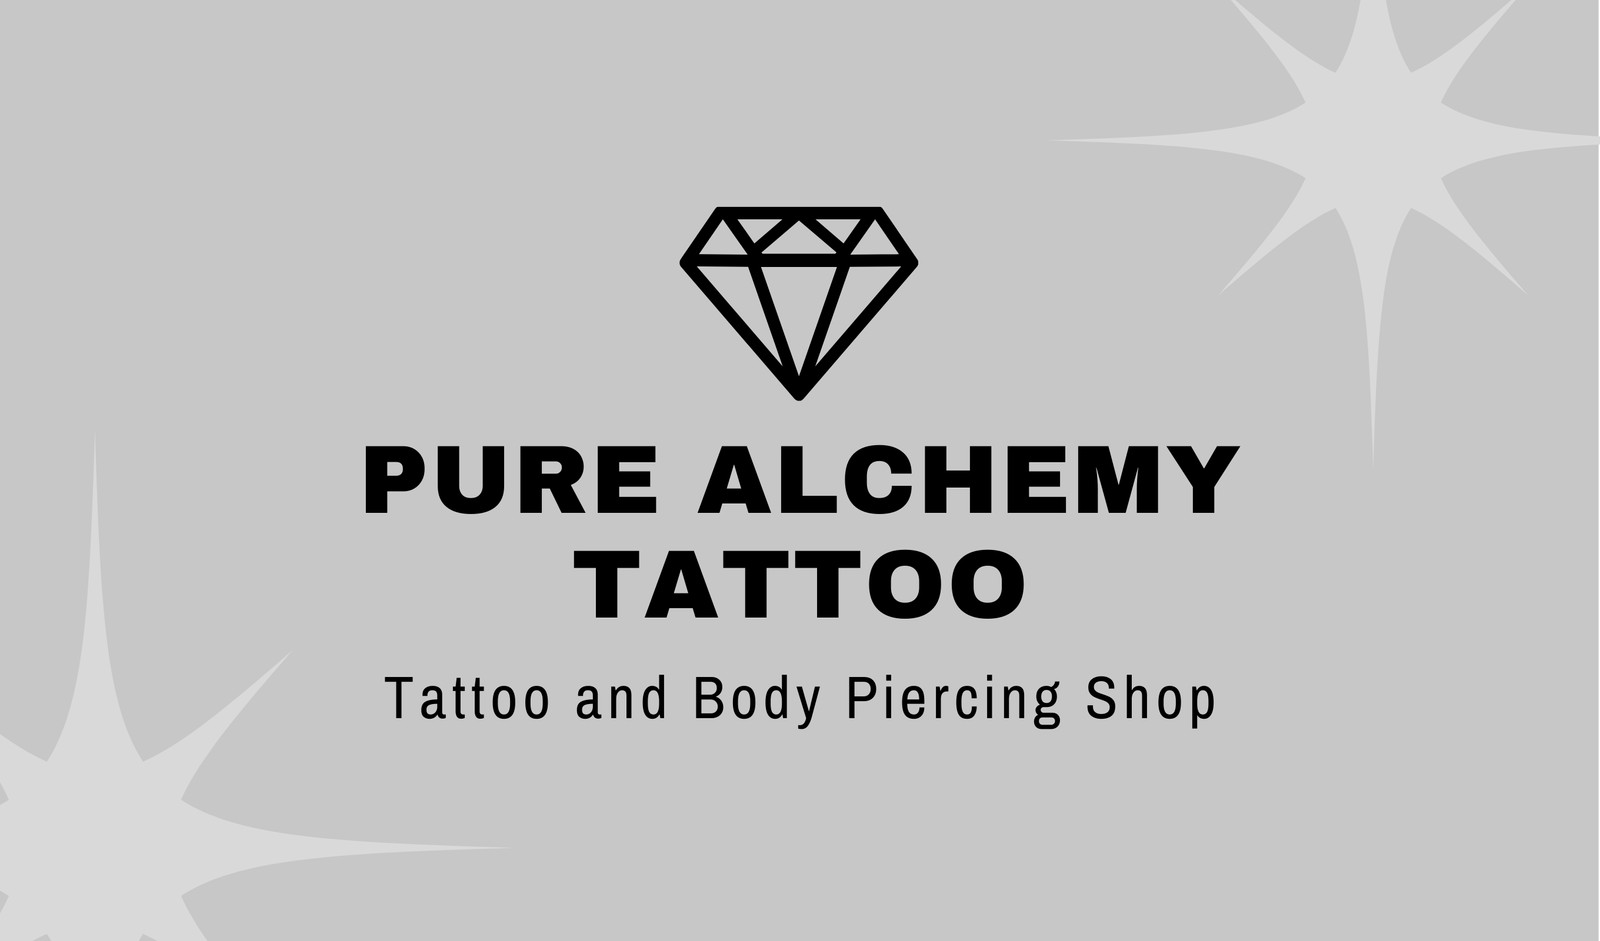 Tattoos | Altered Skin Tattoos and Body Piercing | United States